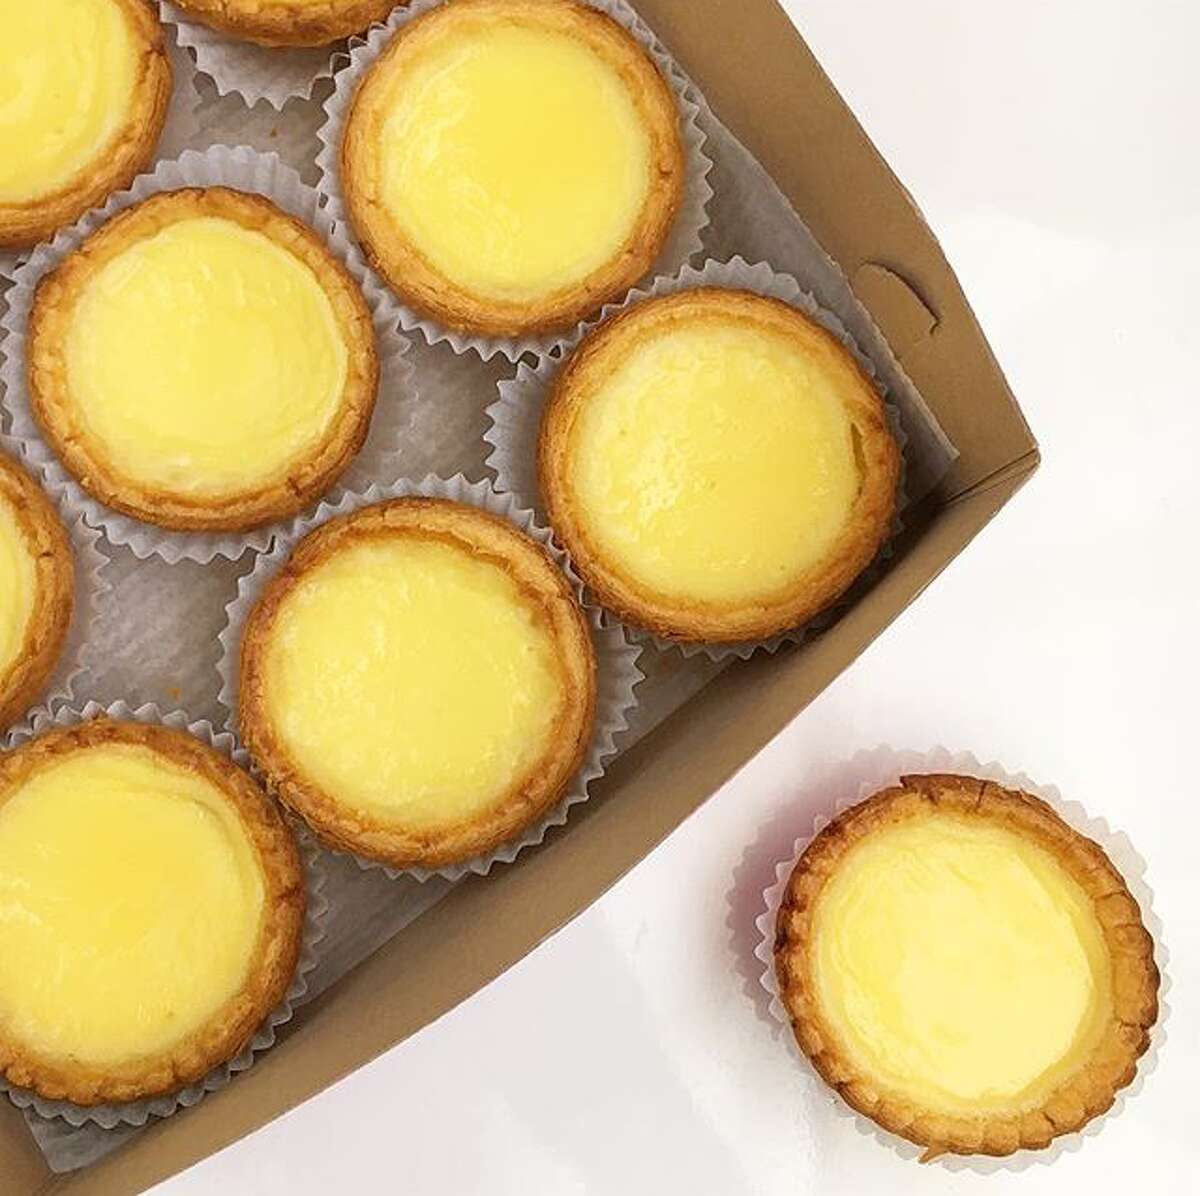 Egg tarts at Golden Gate Bakery in Chinatown.